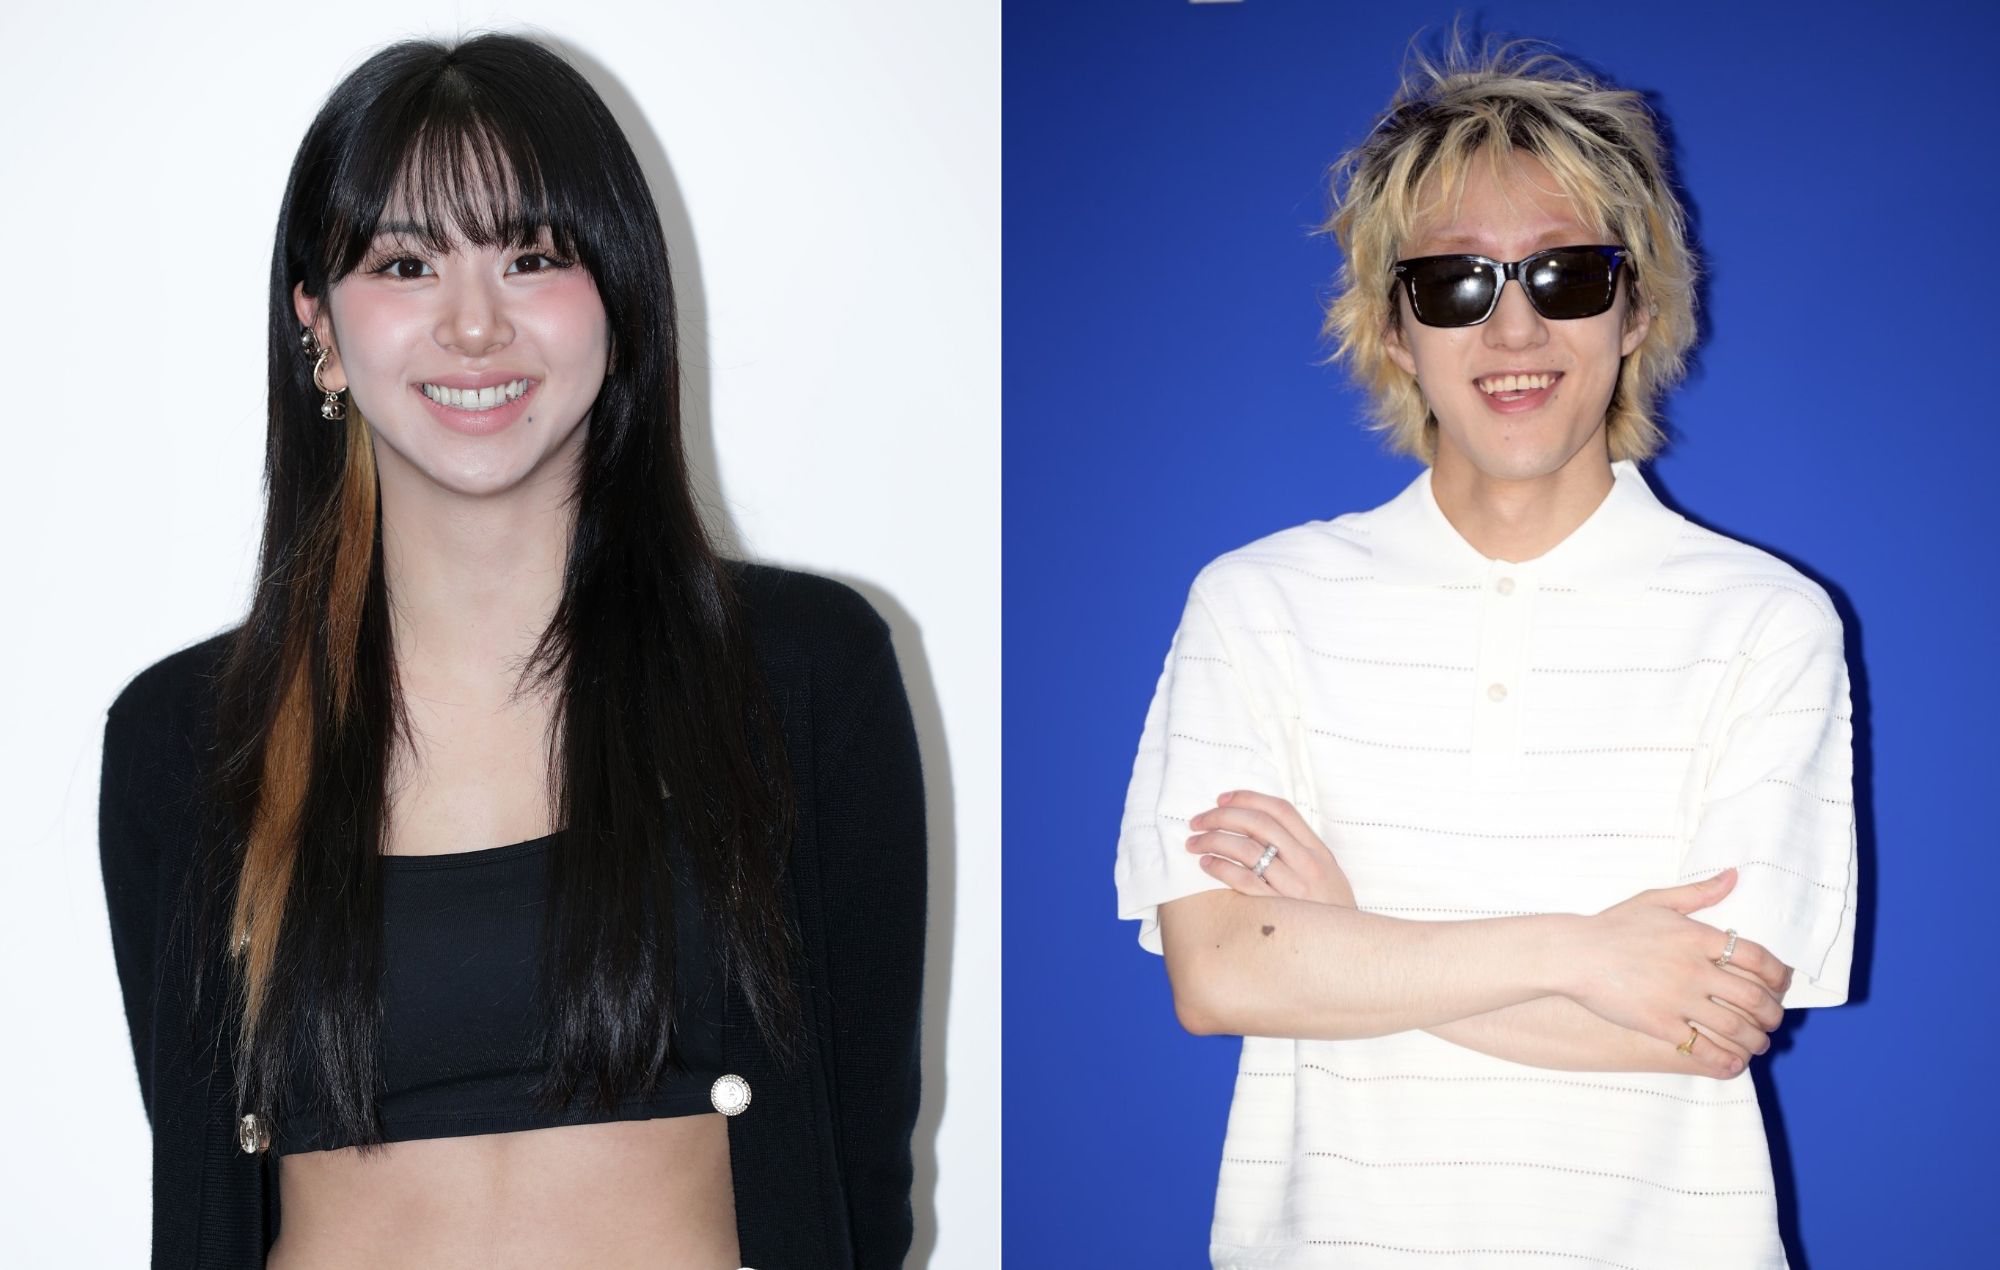 TWICE’s Chaeyoung is dating rapper Zion.T, her label confirms